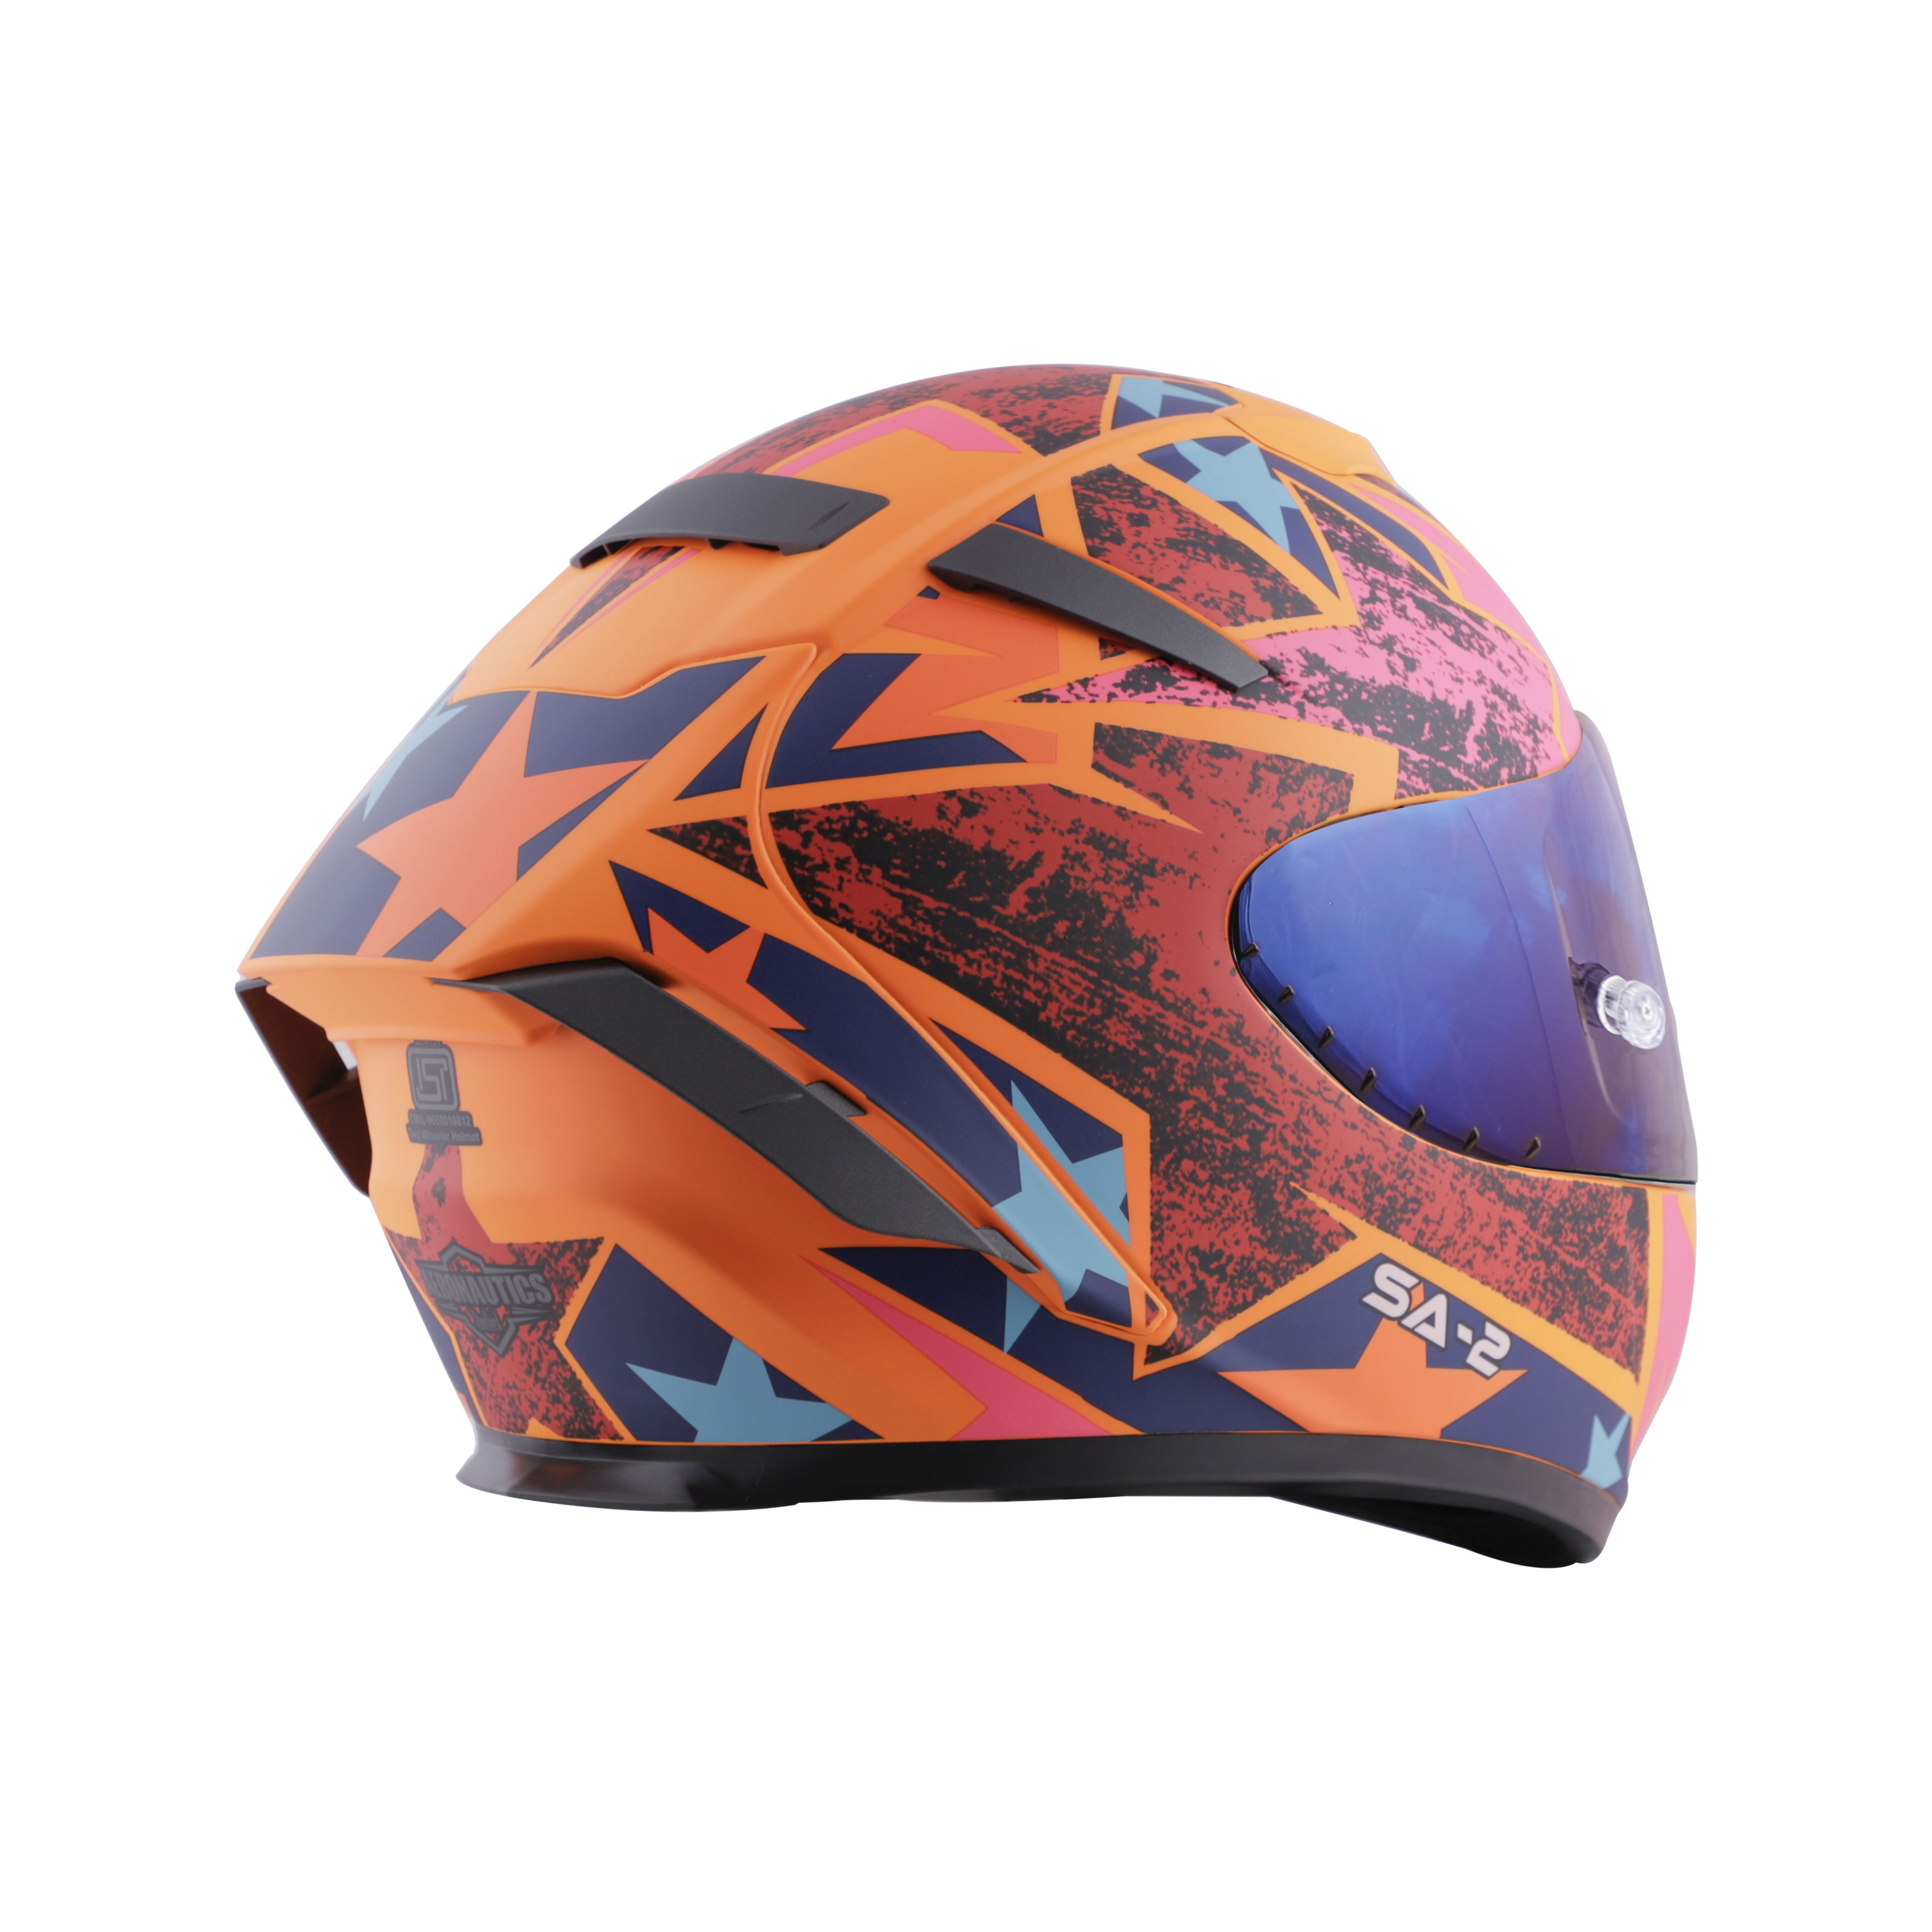 SA-2 STAR GLOSSY FLUO ORANGE WITH RED FITTED WITH CLEAR VISOR EXTRA CHROME BLUE VISOR FREE (WITH ANTI-FOG SHIELD HOLDER)